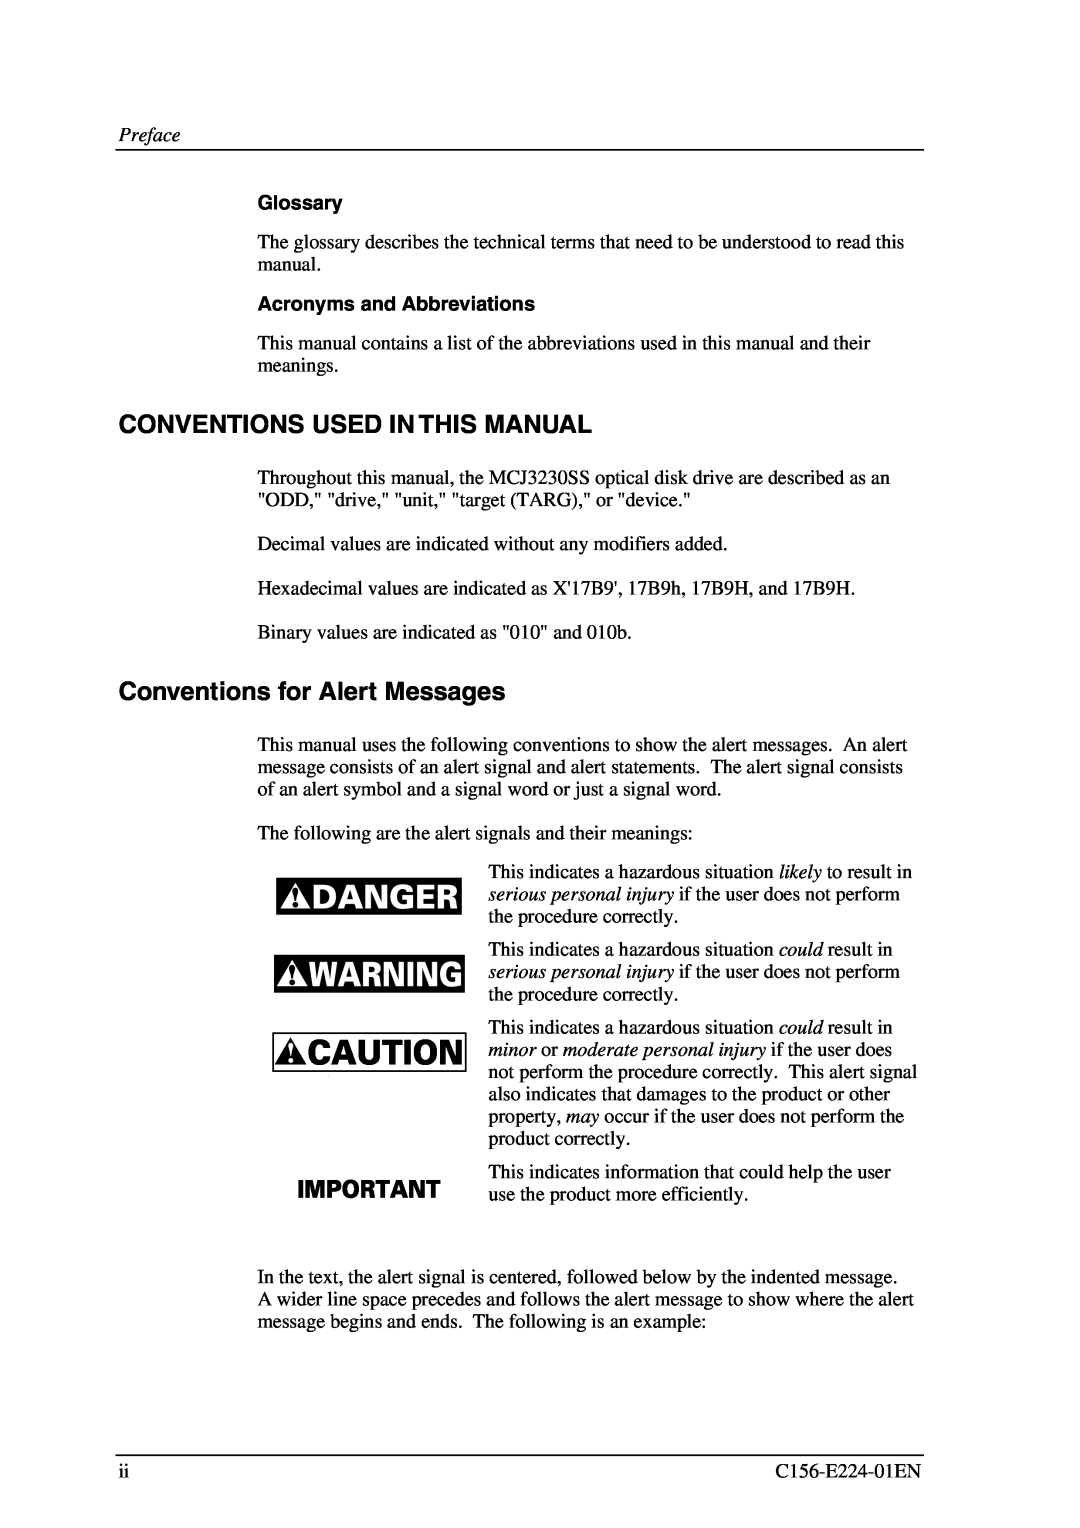 Fujitsu MCJ3230SS Conventions Used In This Manual, Conventions for Alert Messages, Glossary, Acronyms and Abbreviations 